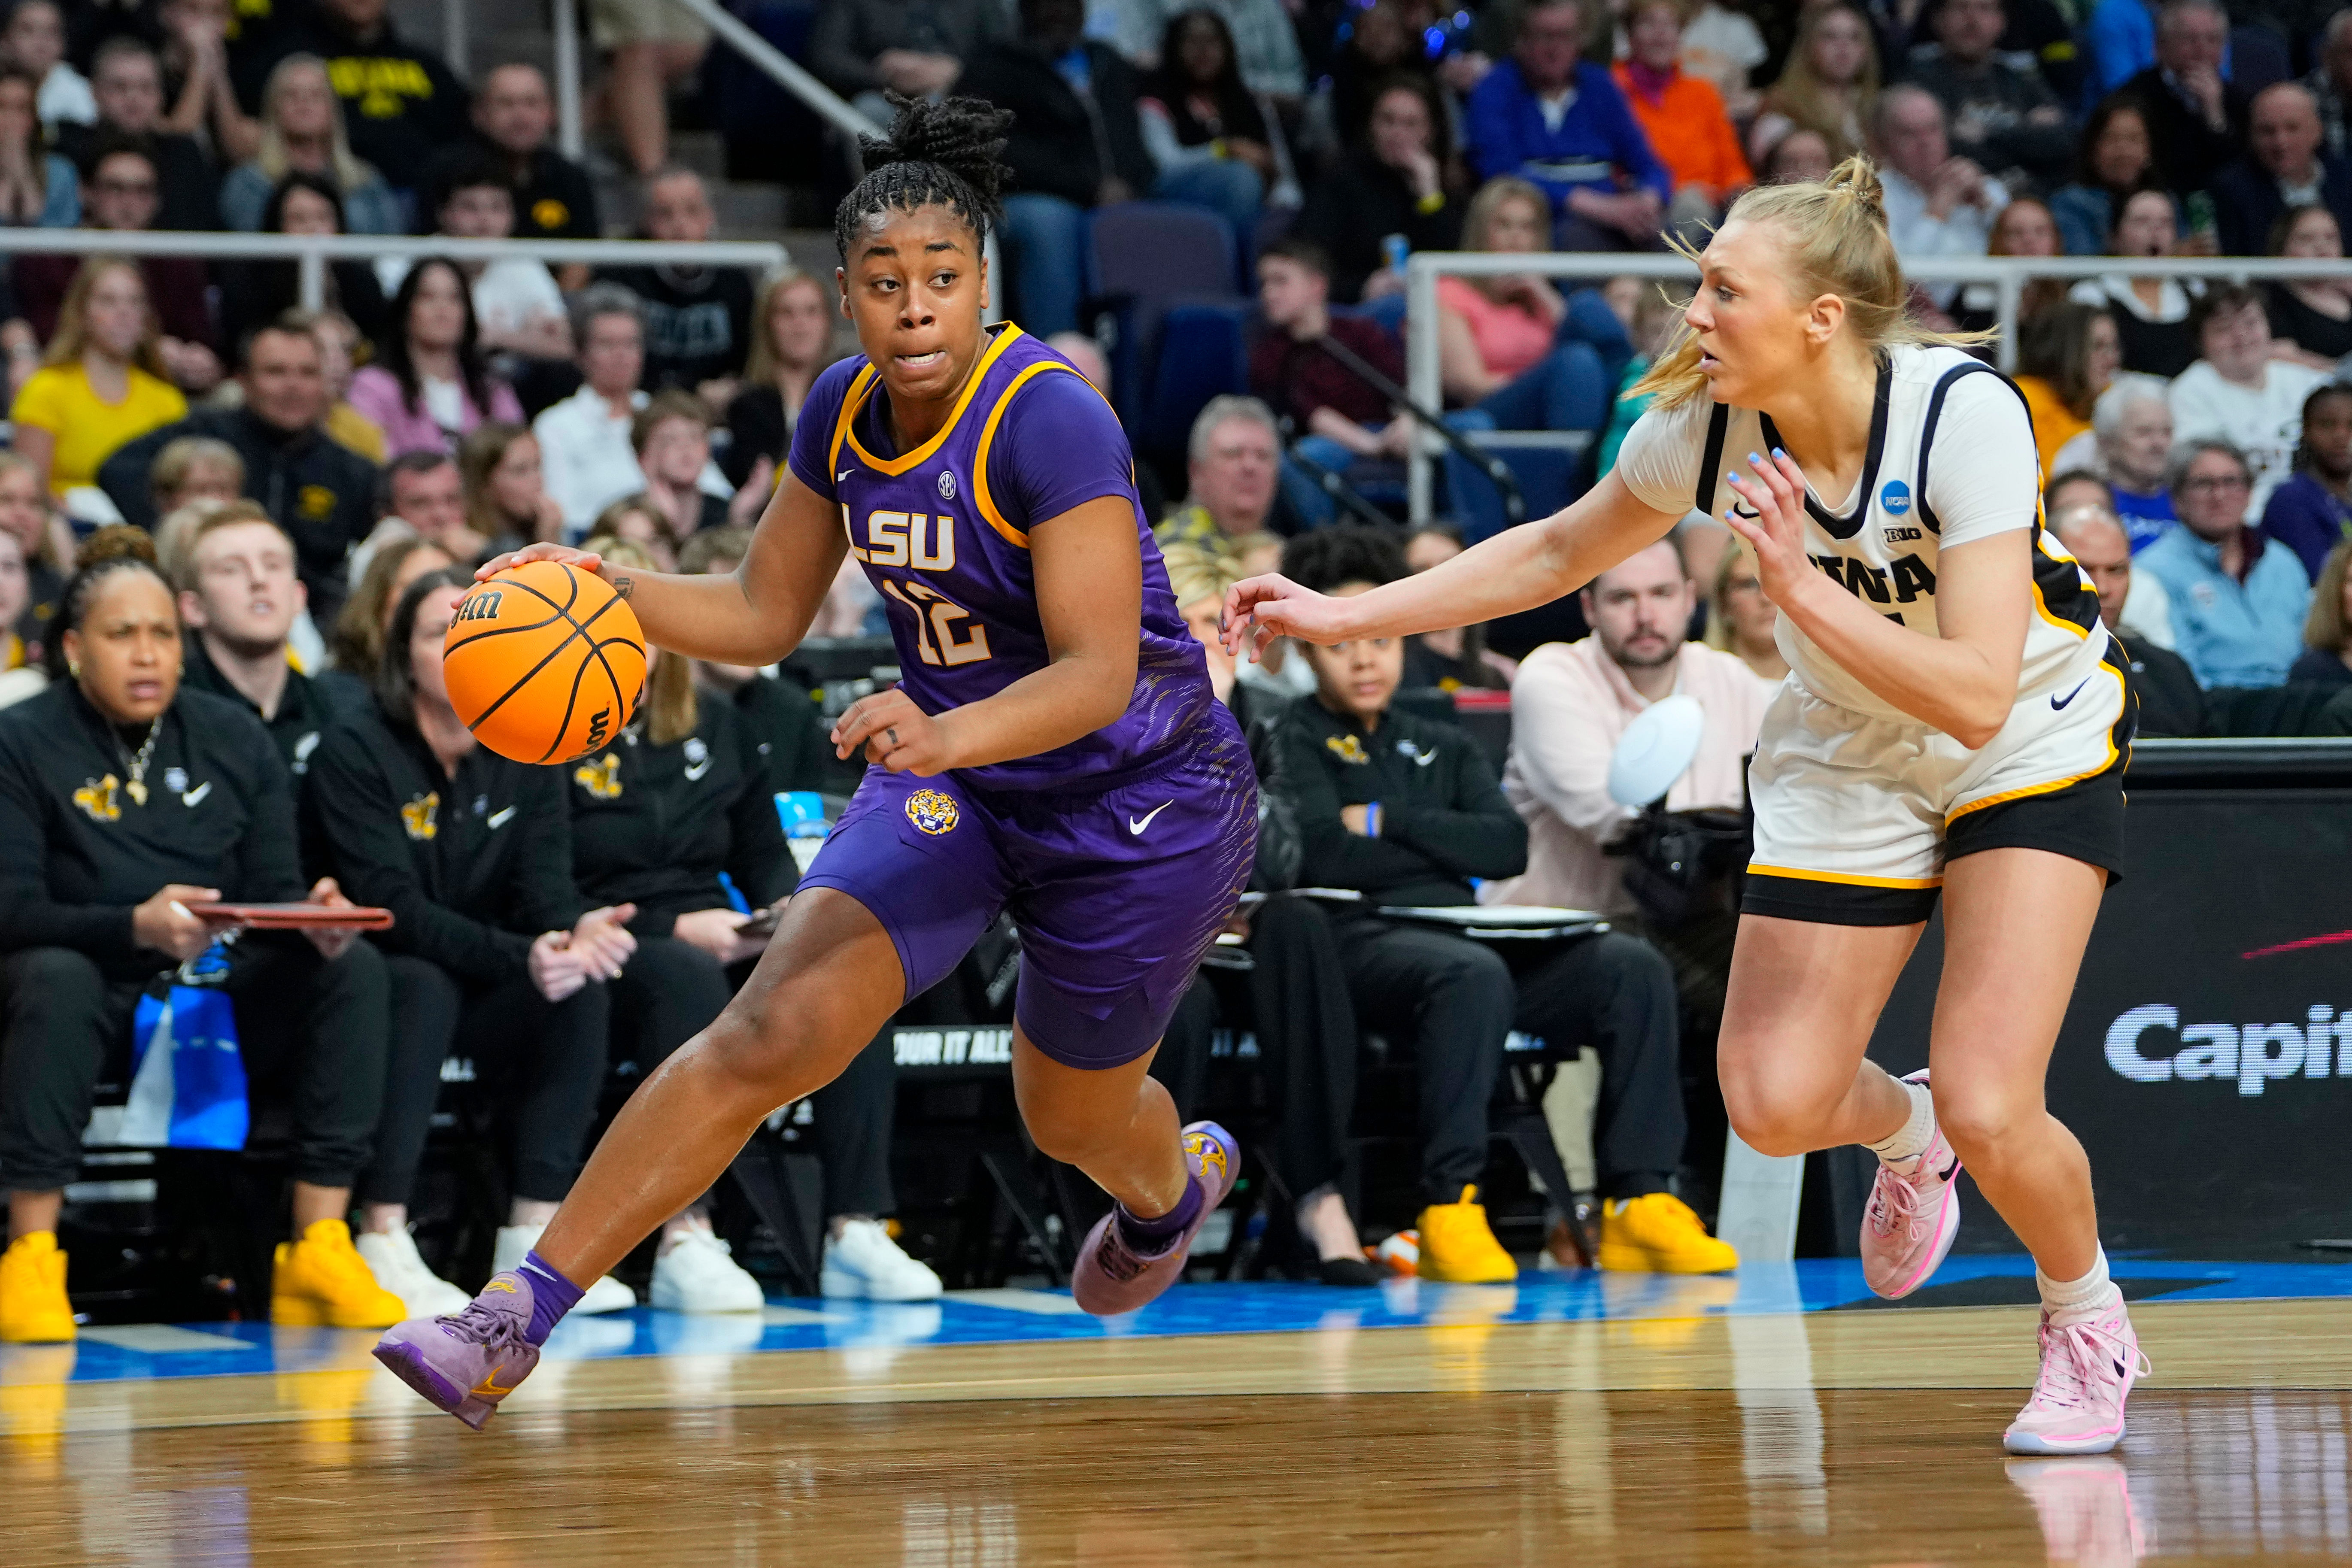 Mikaylah Williams is expected to play bigger roles next season for LSU following the departure of Hailey Van Lith.